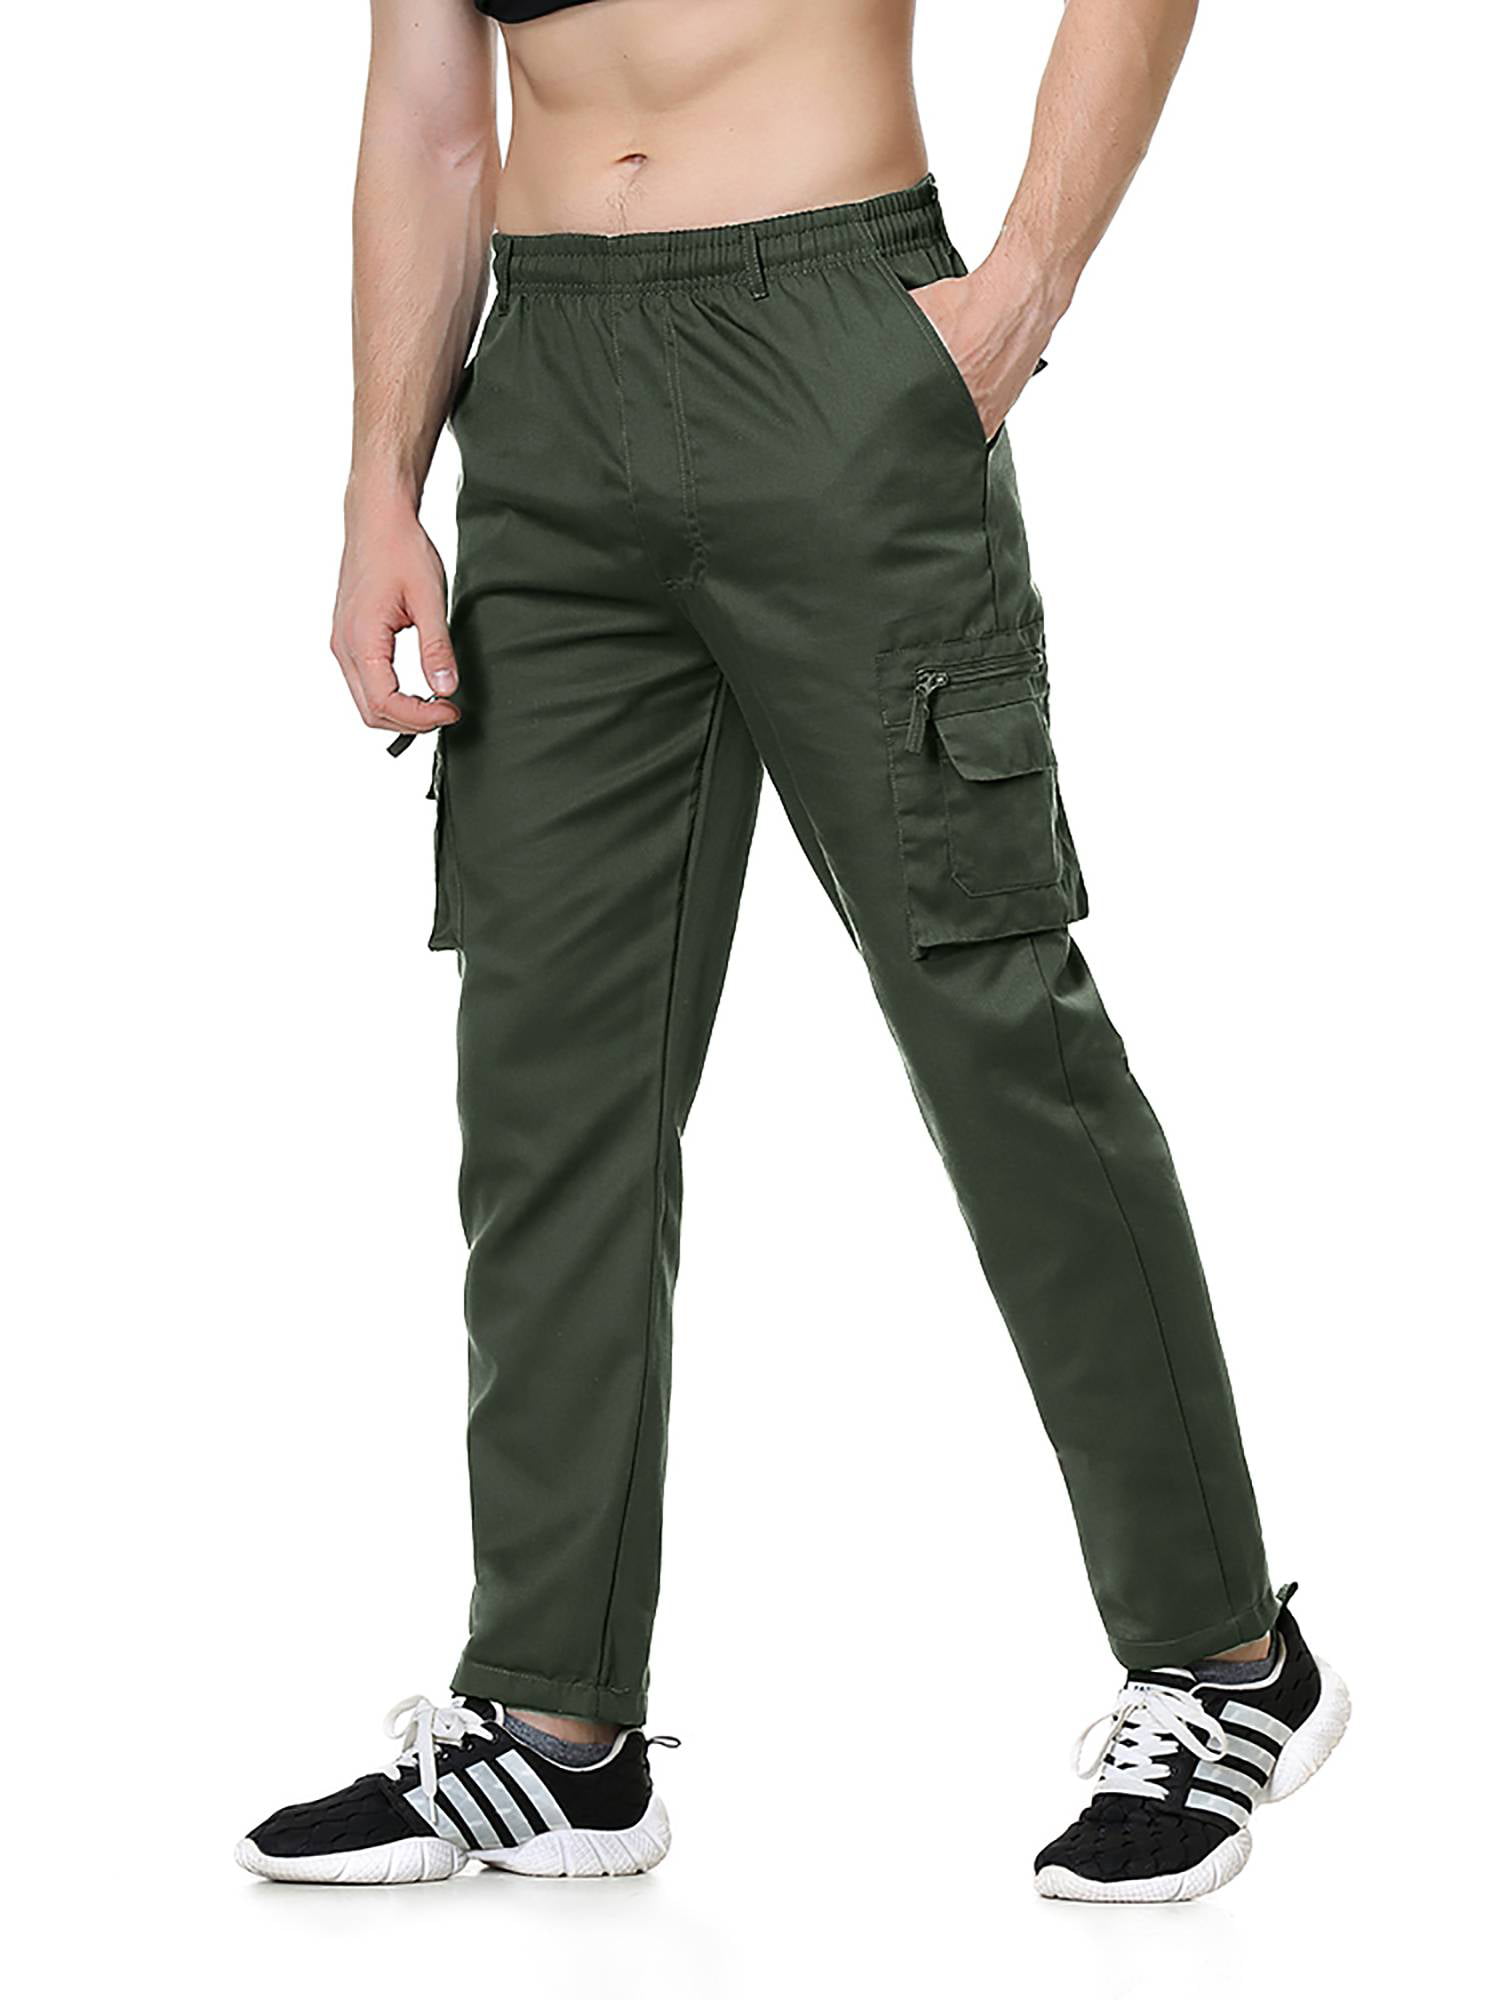 SELX Men Comfy Multi Pockets Solid Straight-Fit Cargo Work Pants